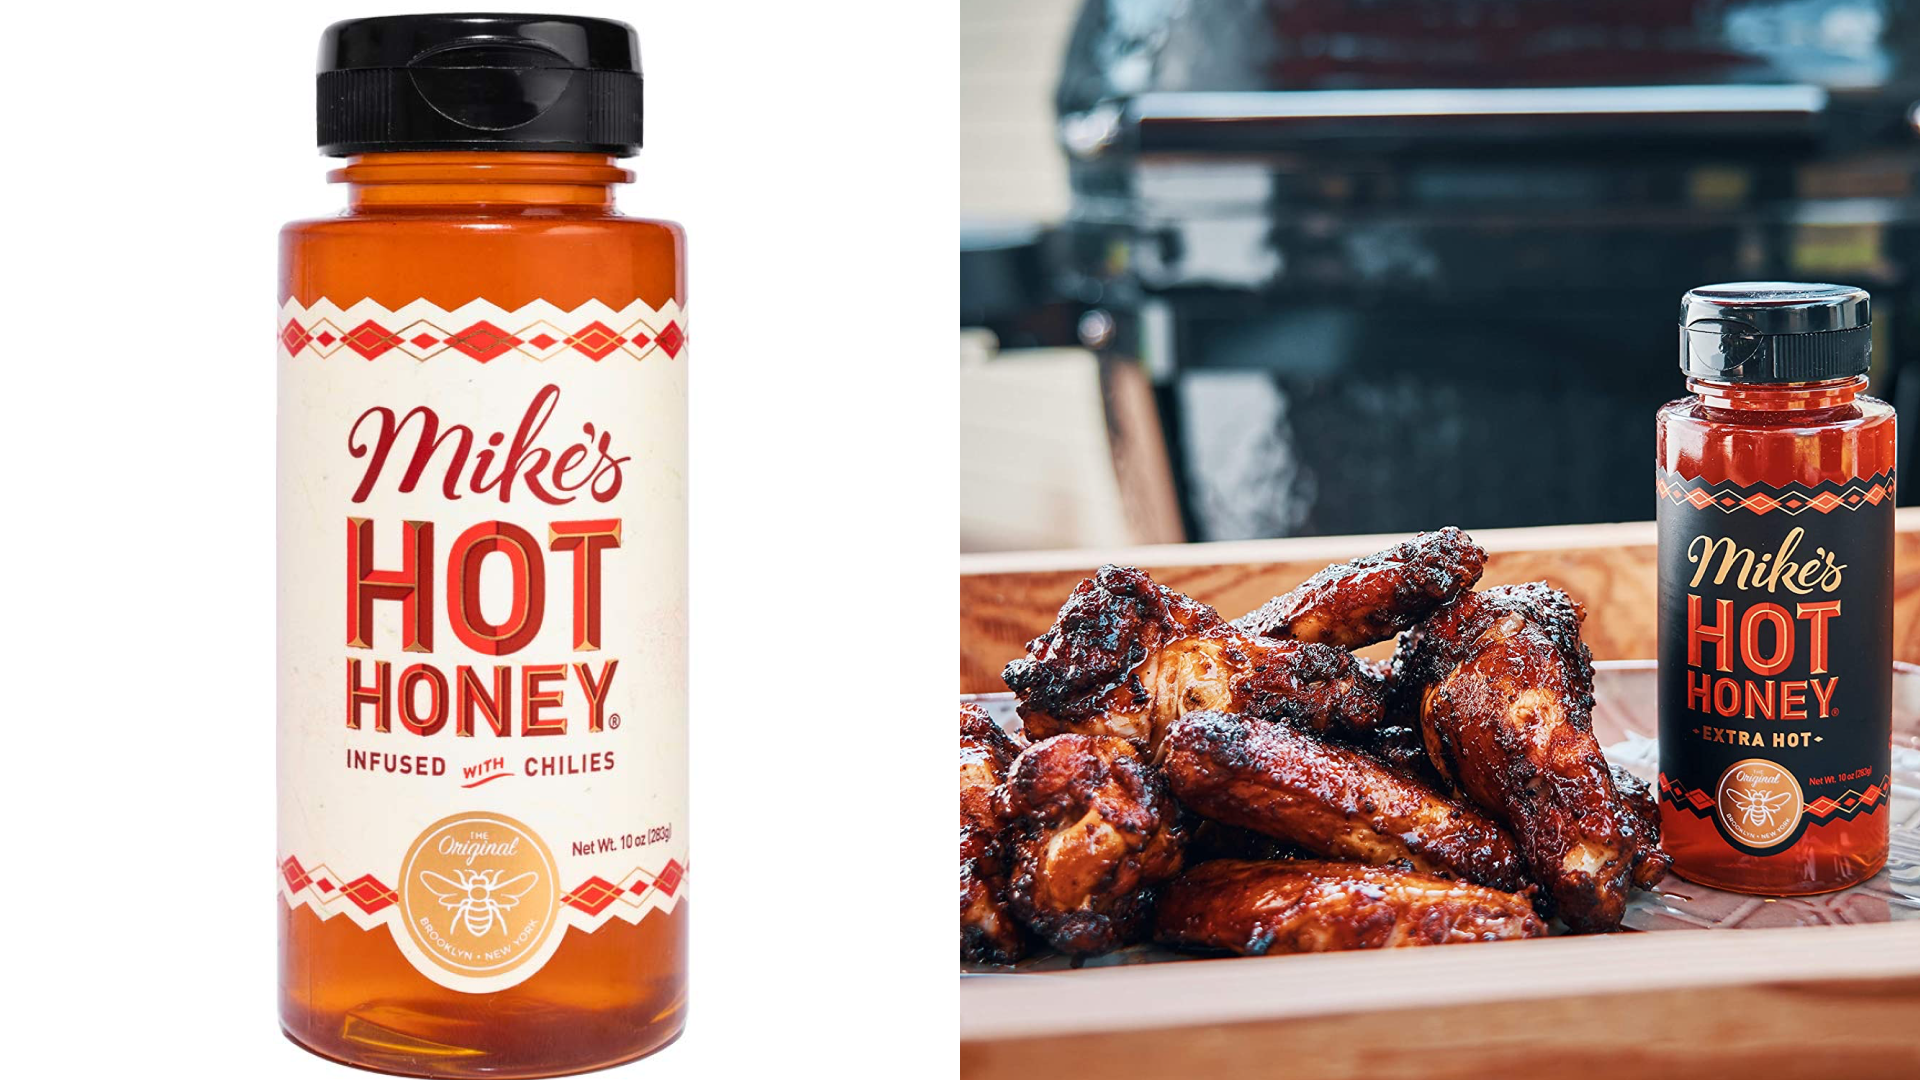 Mikes hot honey best exotic condiments to try